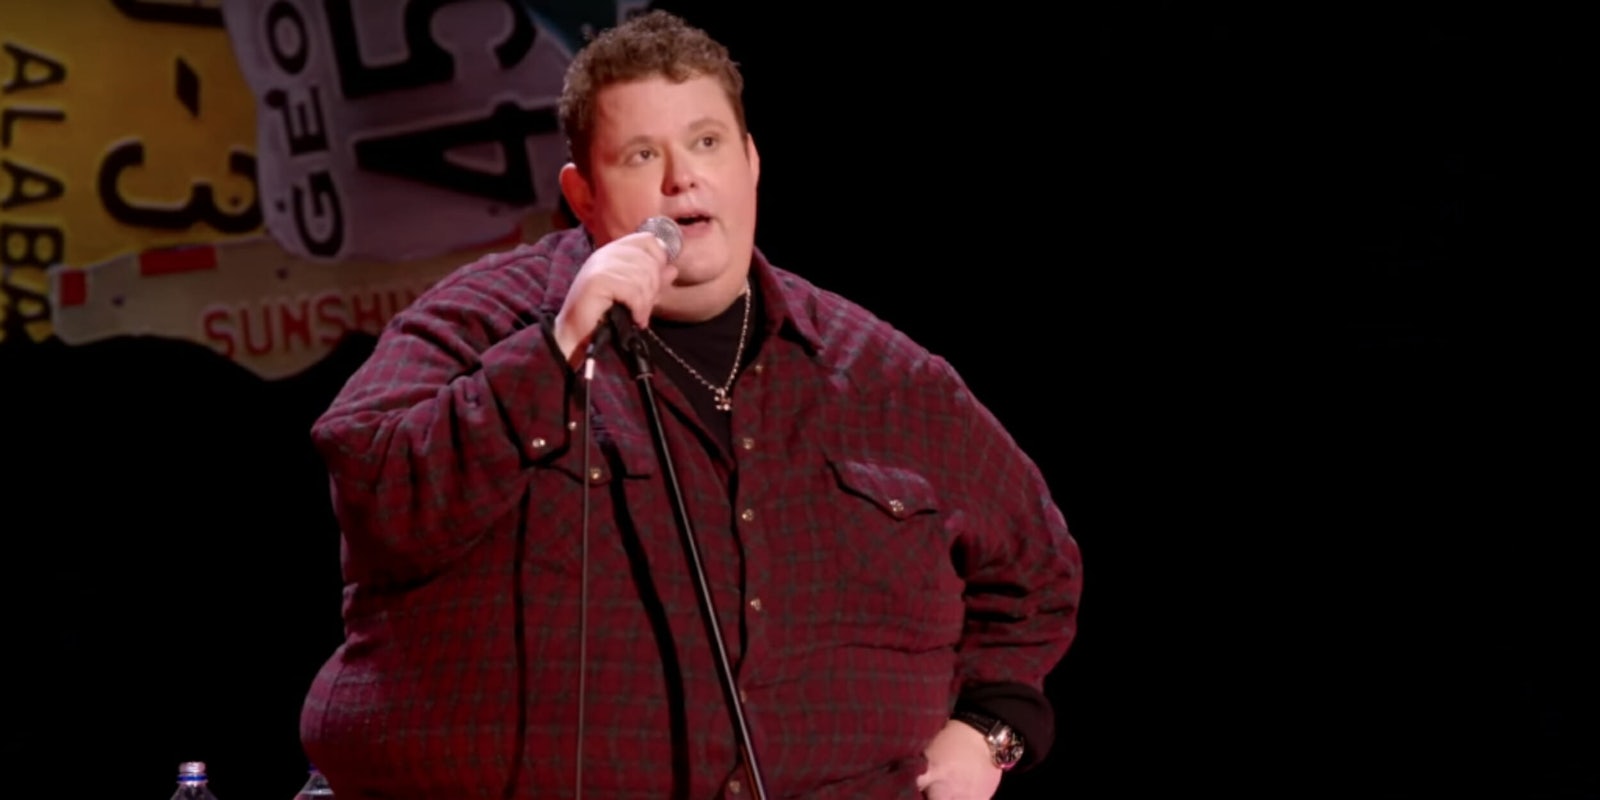 ralphie may dead at age 45